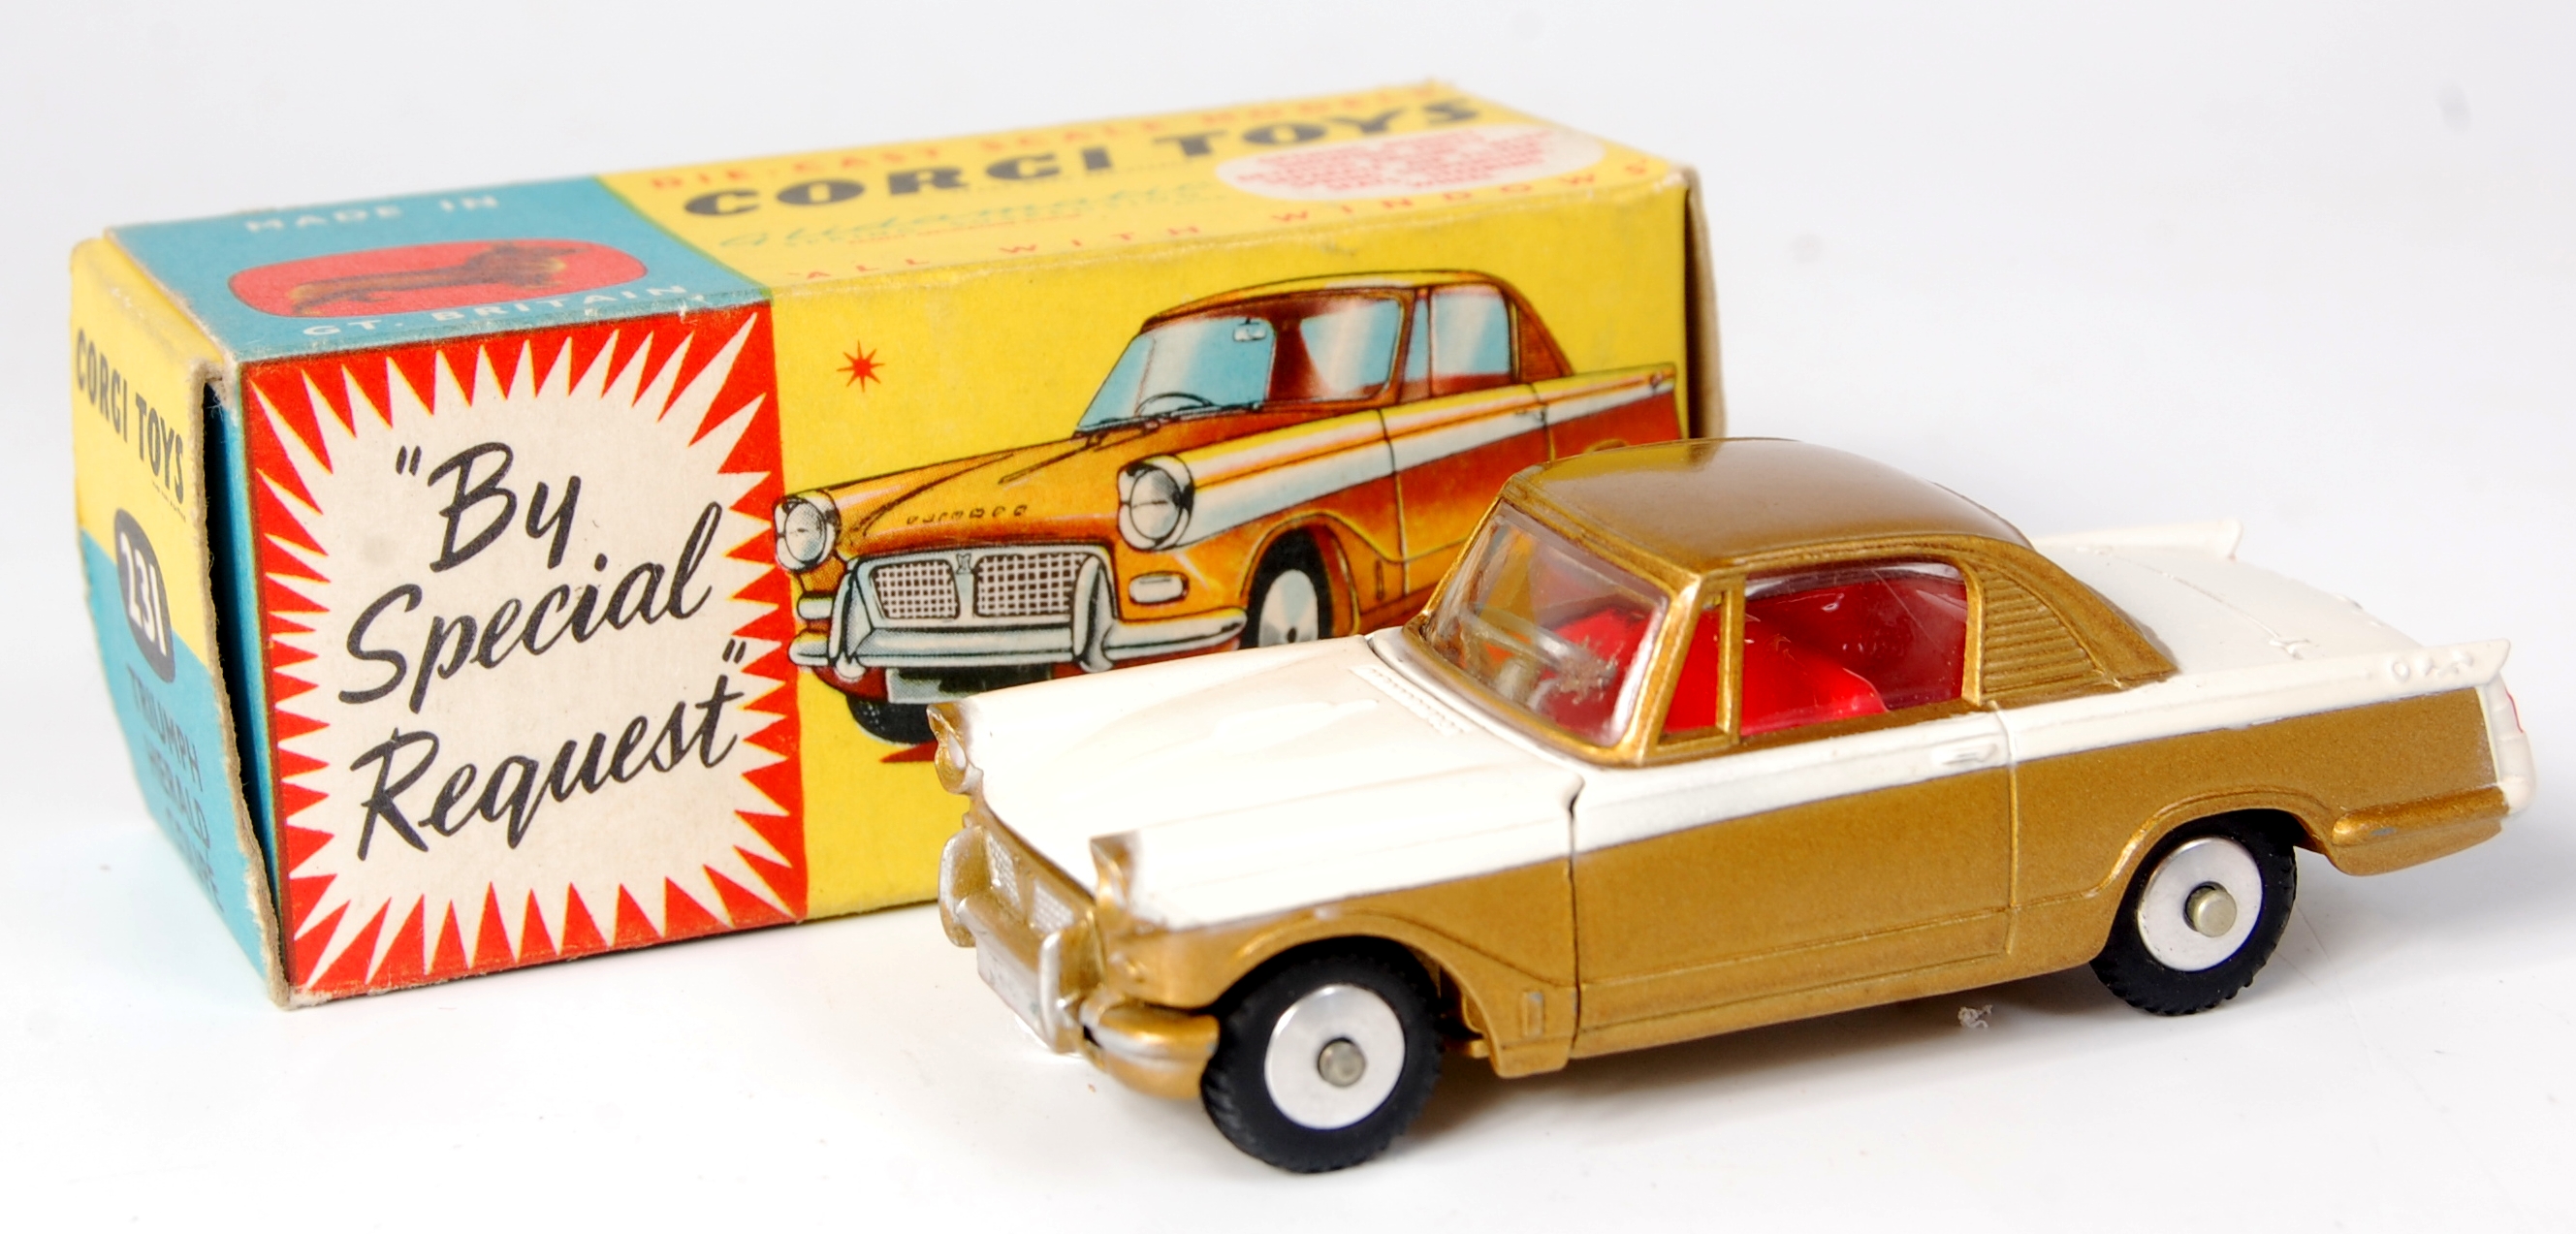 Corgi Toys, 231 Triumph Herald Coupe, gold roof and lower body with white central body, red